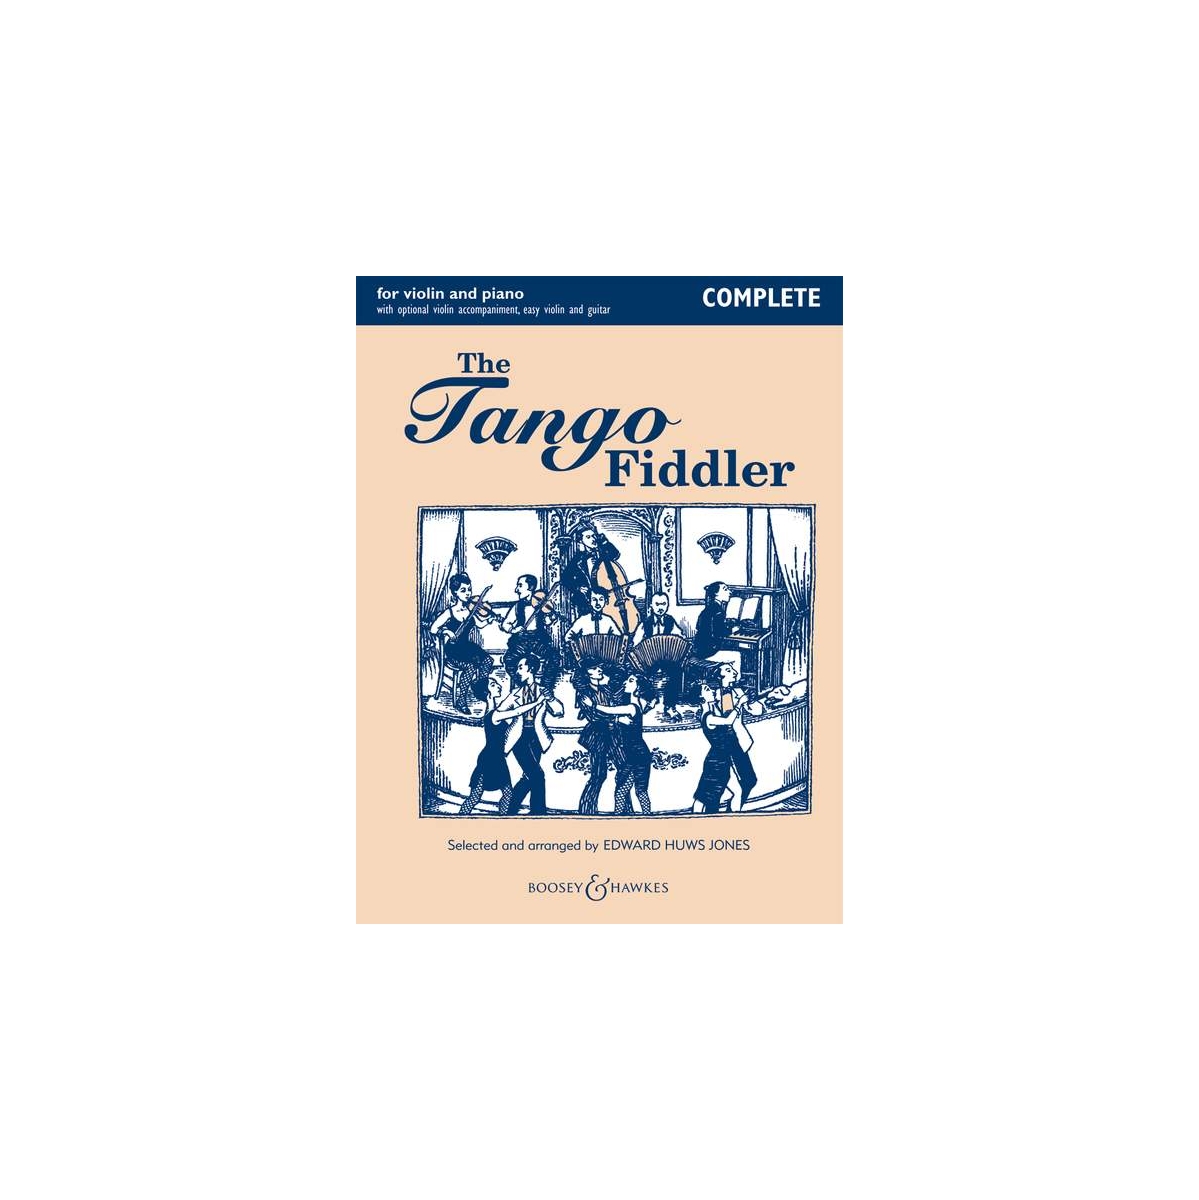 The Tango Fiddler [Complete]